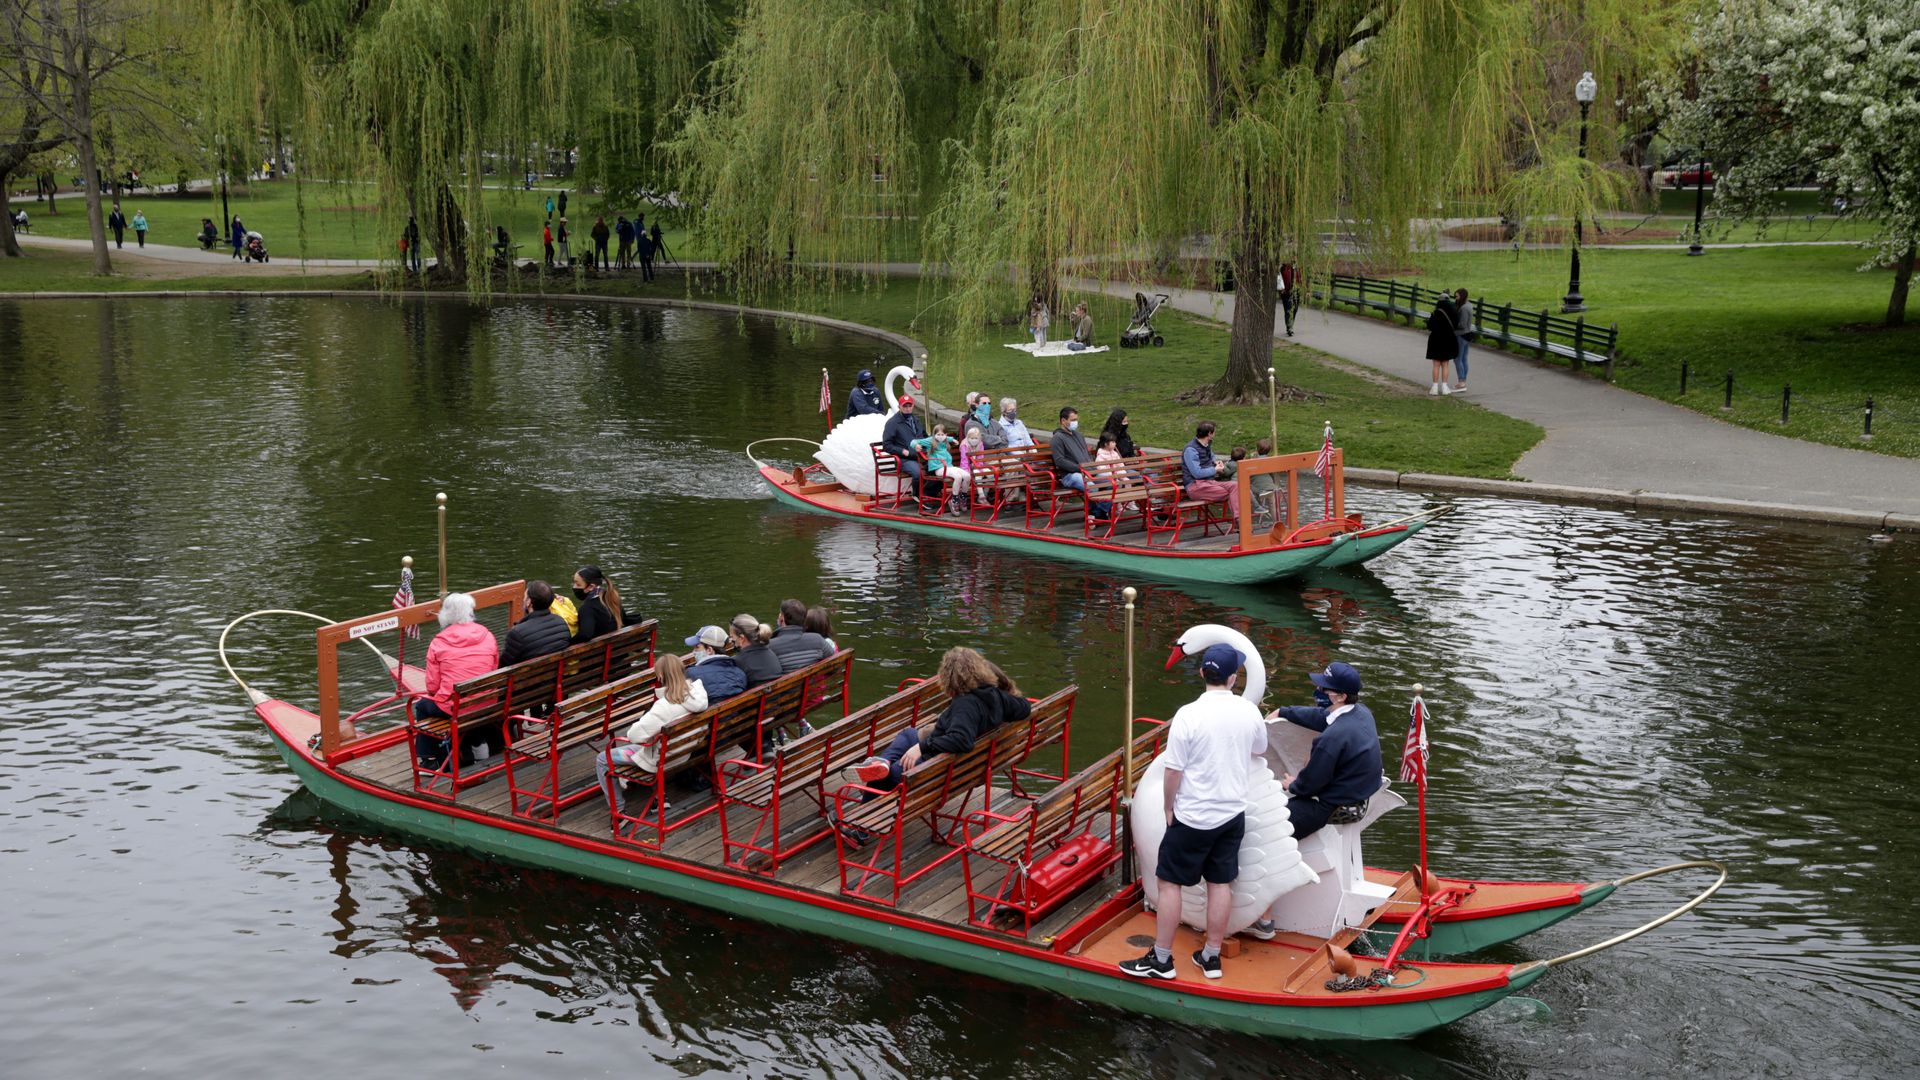 Two swan boats ride around the pond at The Public Garden in Boston. The boats typically need at least 10 people on board to operate.